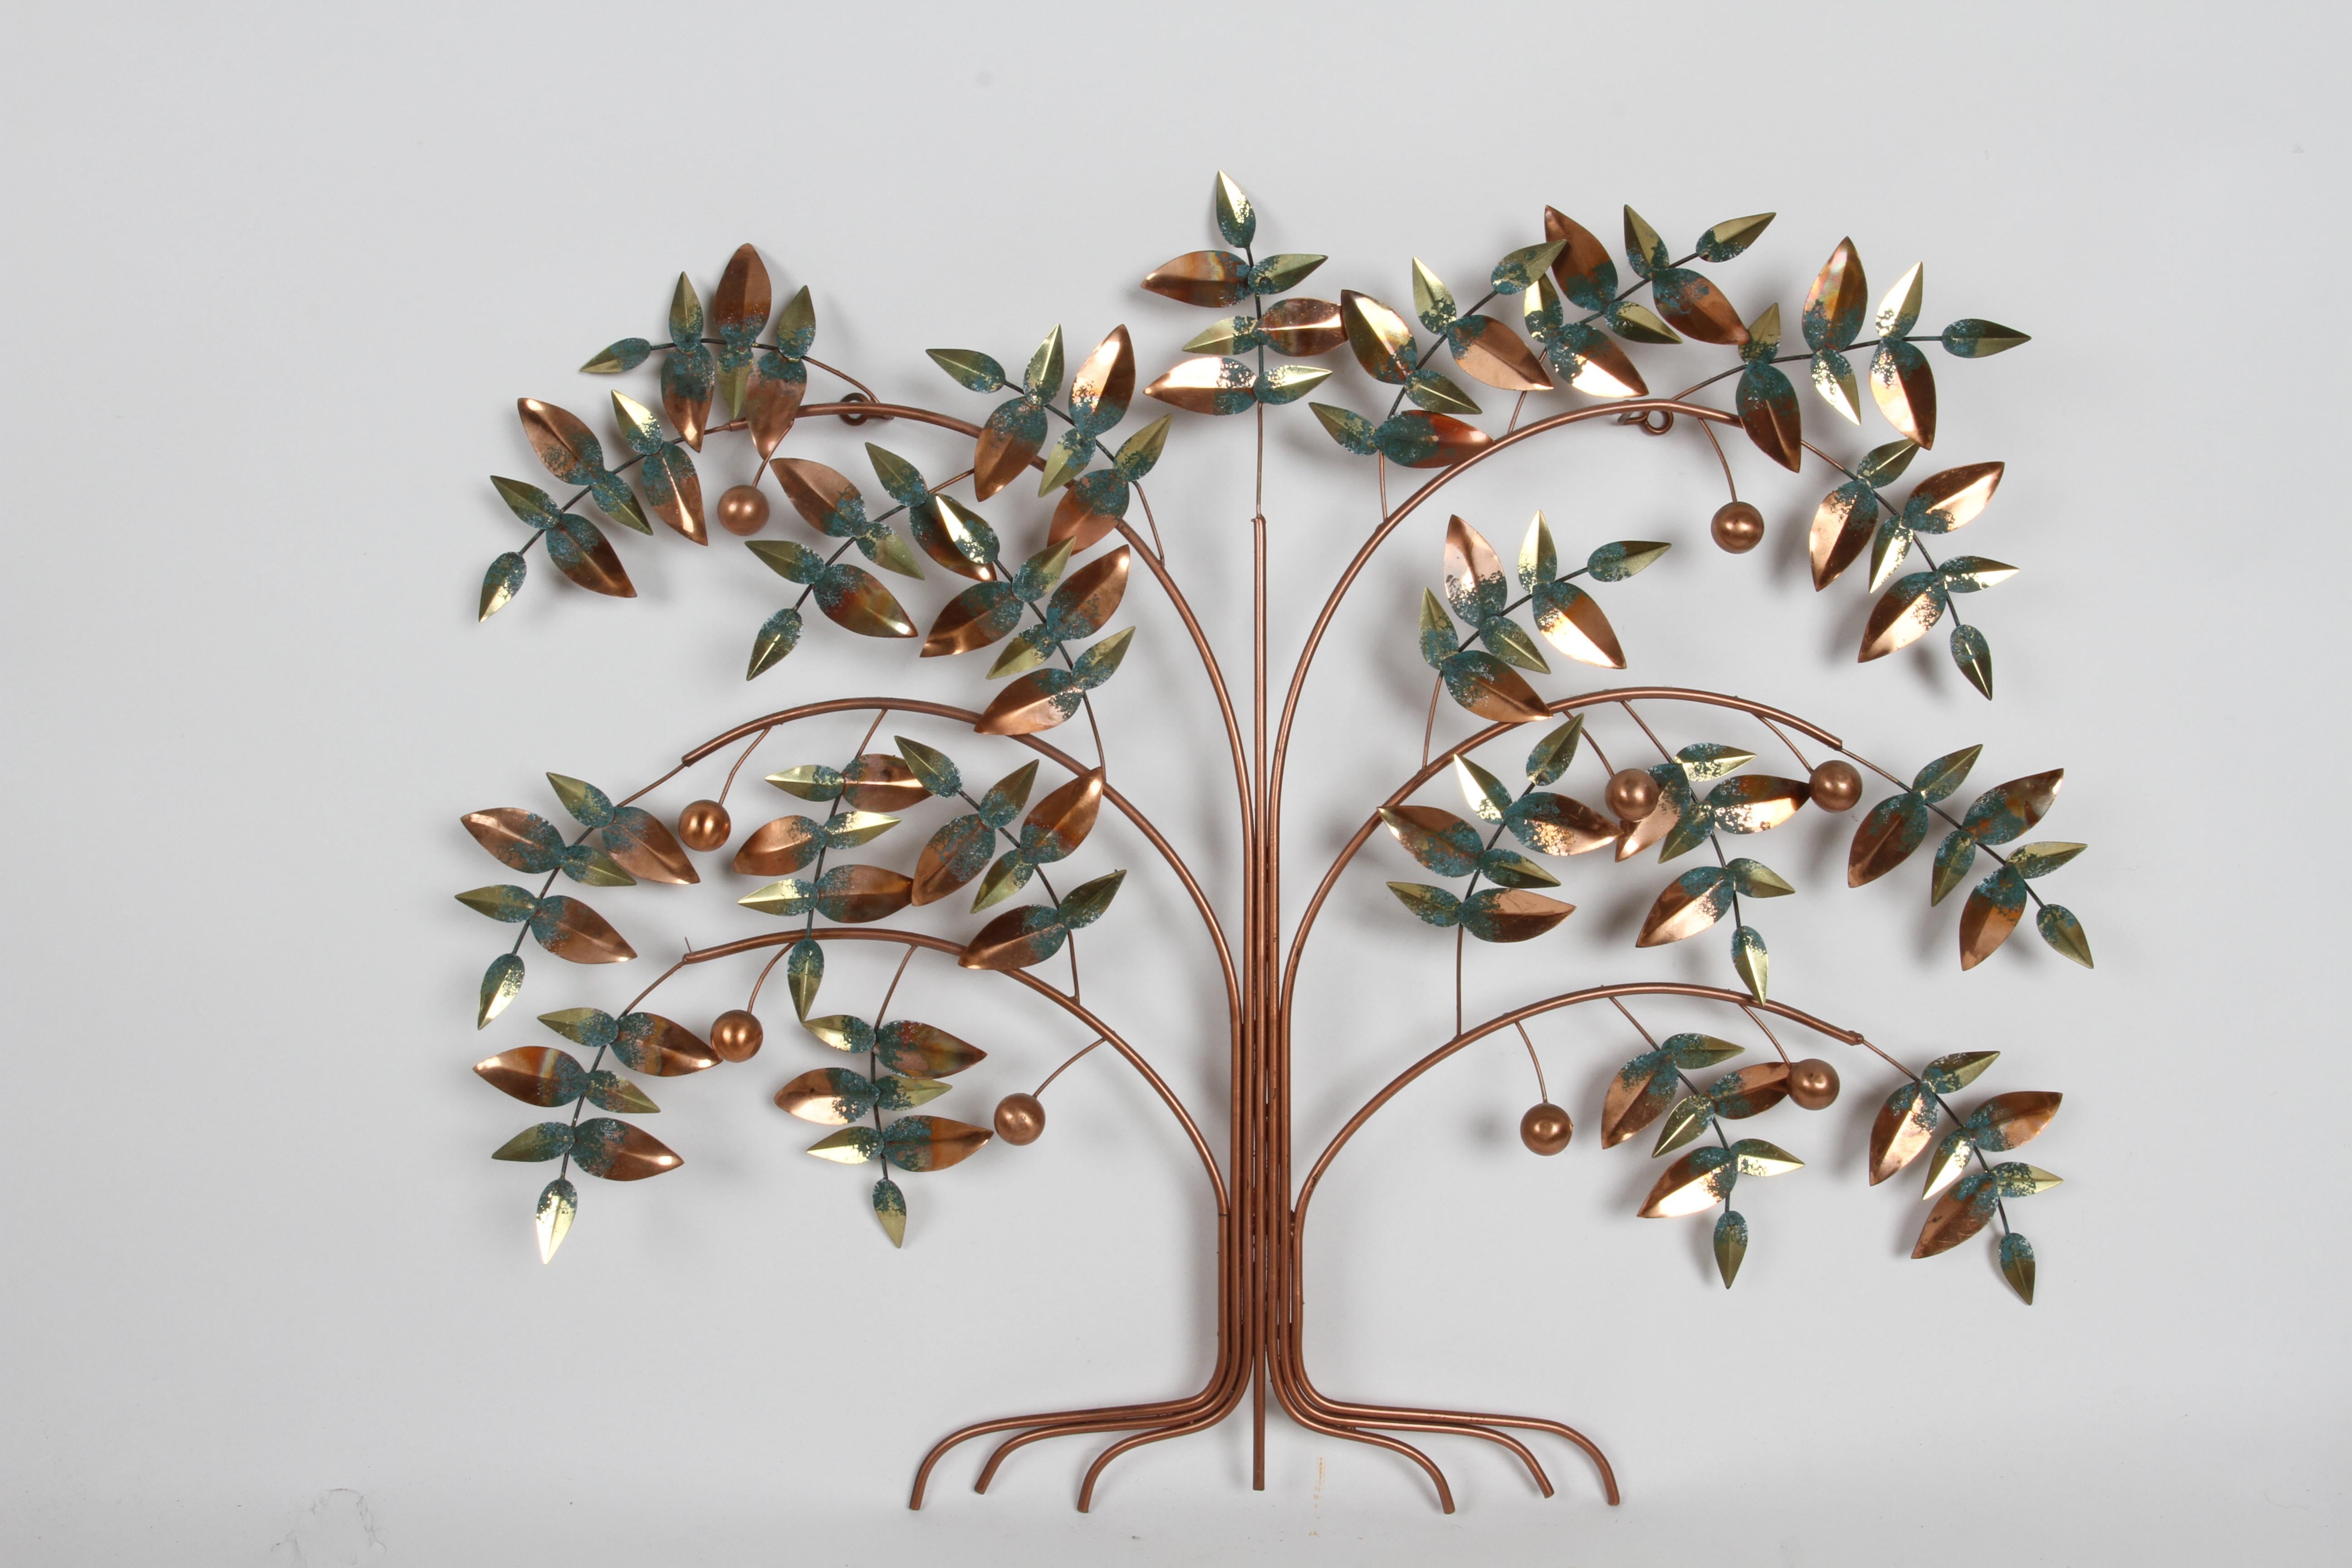 Tree of life wall sculpture in copper toned metal with verdigris highlights on leaves and copper ball fruit. Faded signature C. Jere and dated 1977. In very nice condition, bright and fresh. 